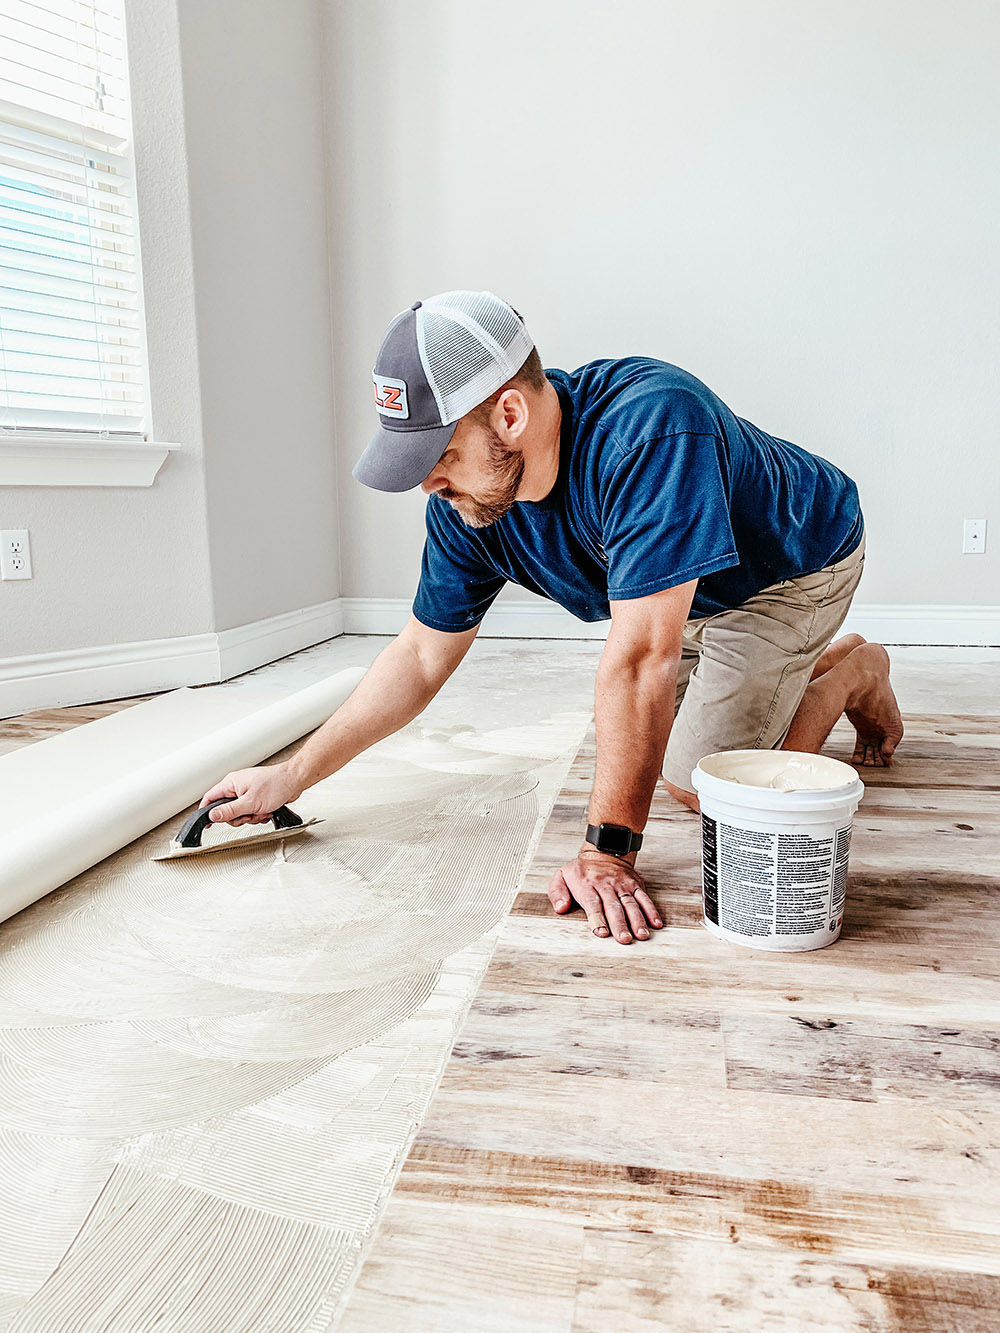 A man using a u-shaped trowel to apply adhesive to a concrete floor.